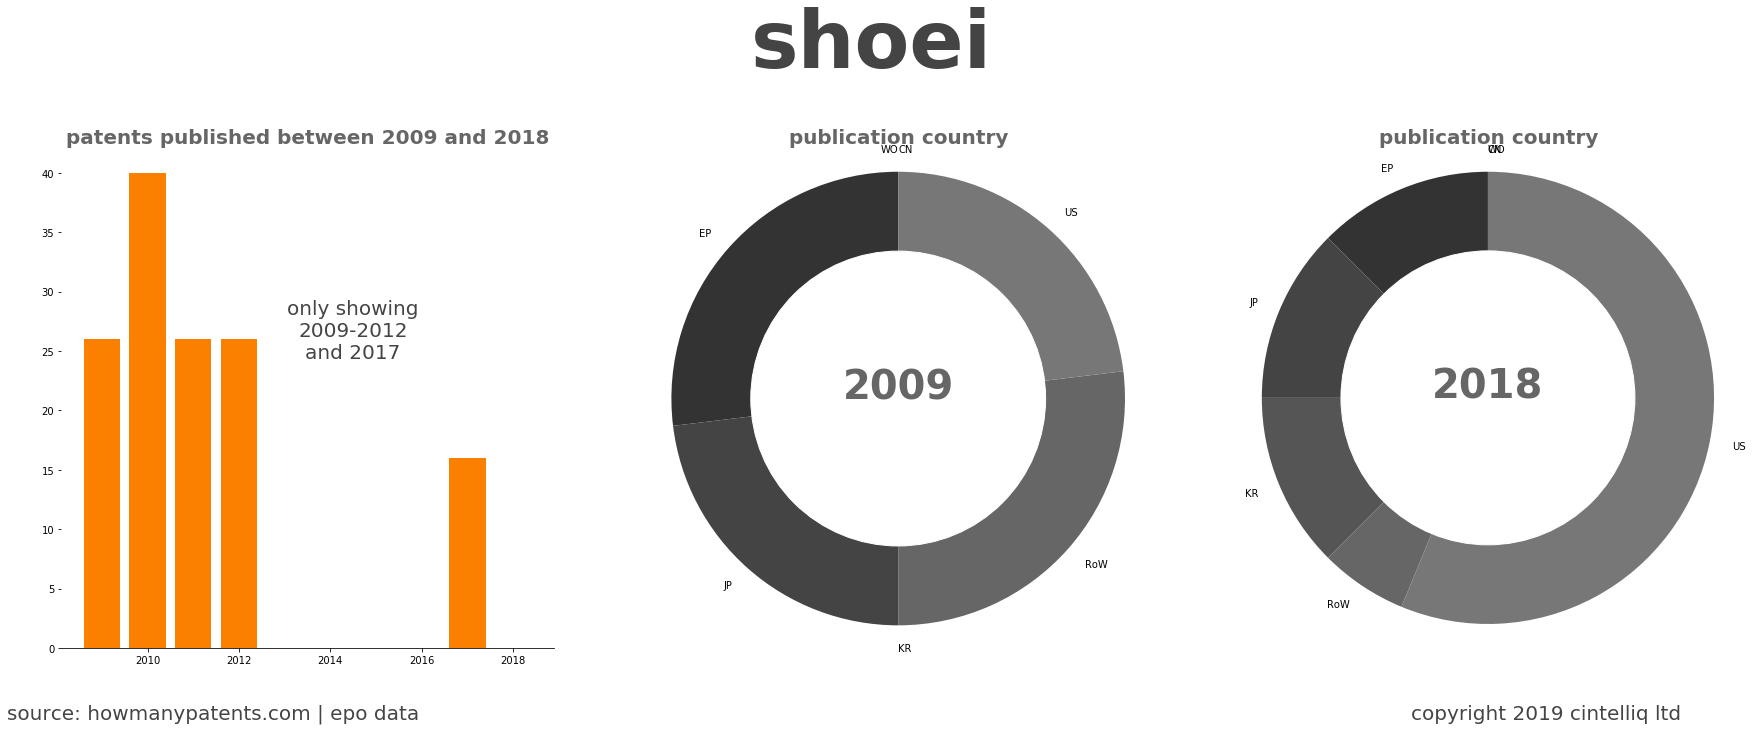 summary of patents for Shoei